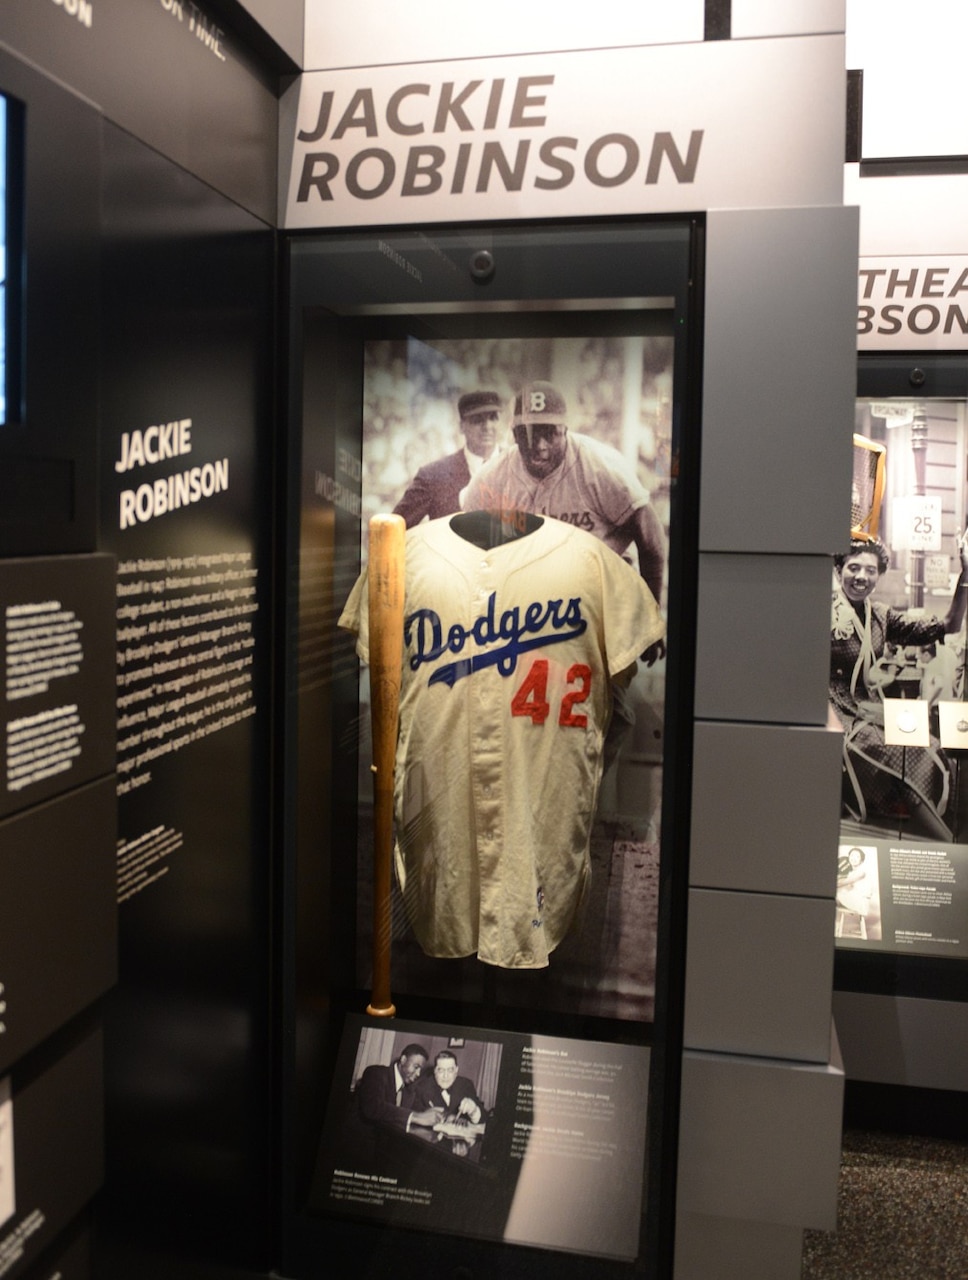 A No. 42 baseball jersey with the name Dodgers splashed across the front is on display in a museum case.